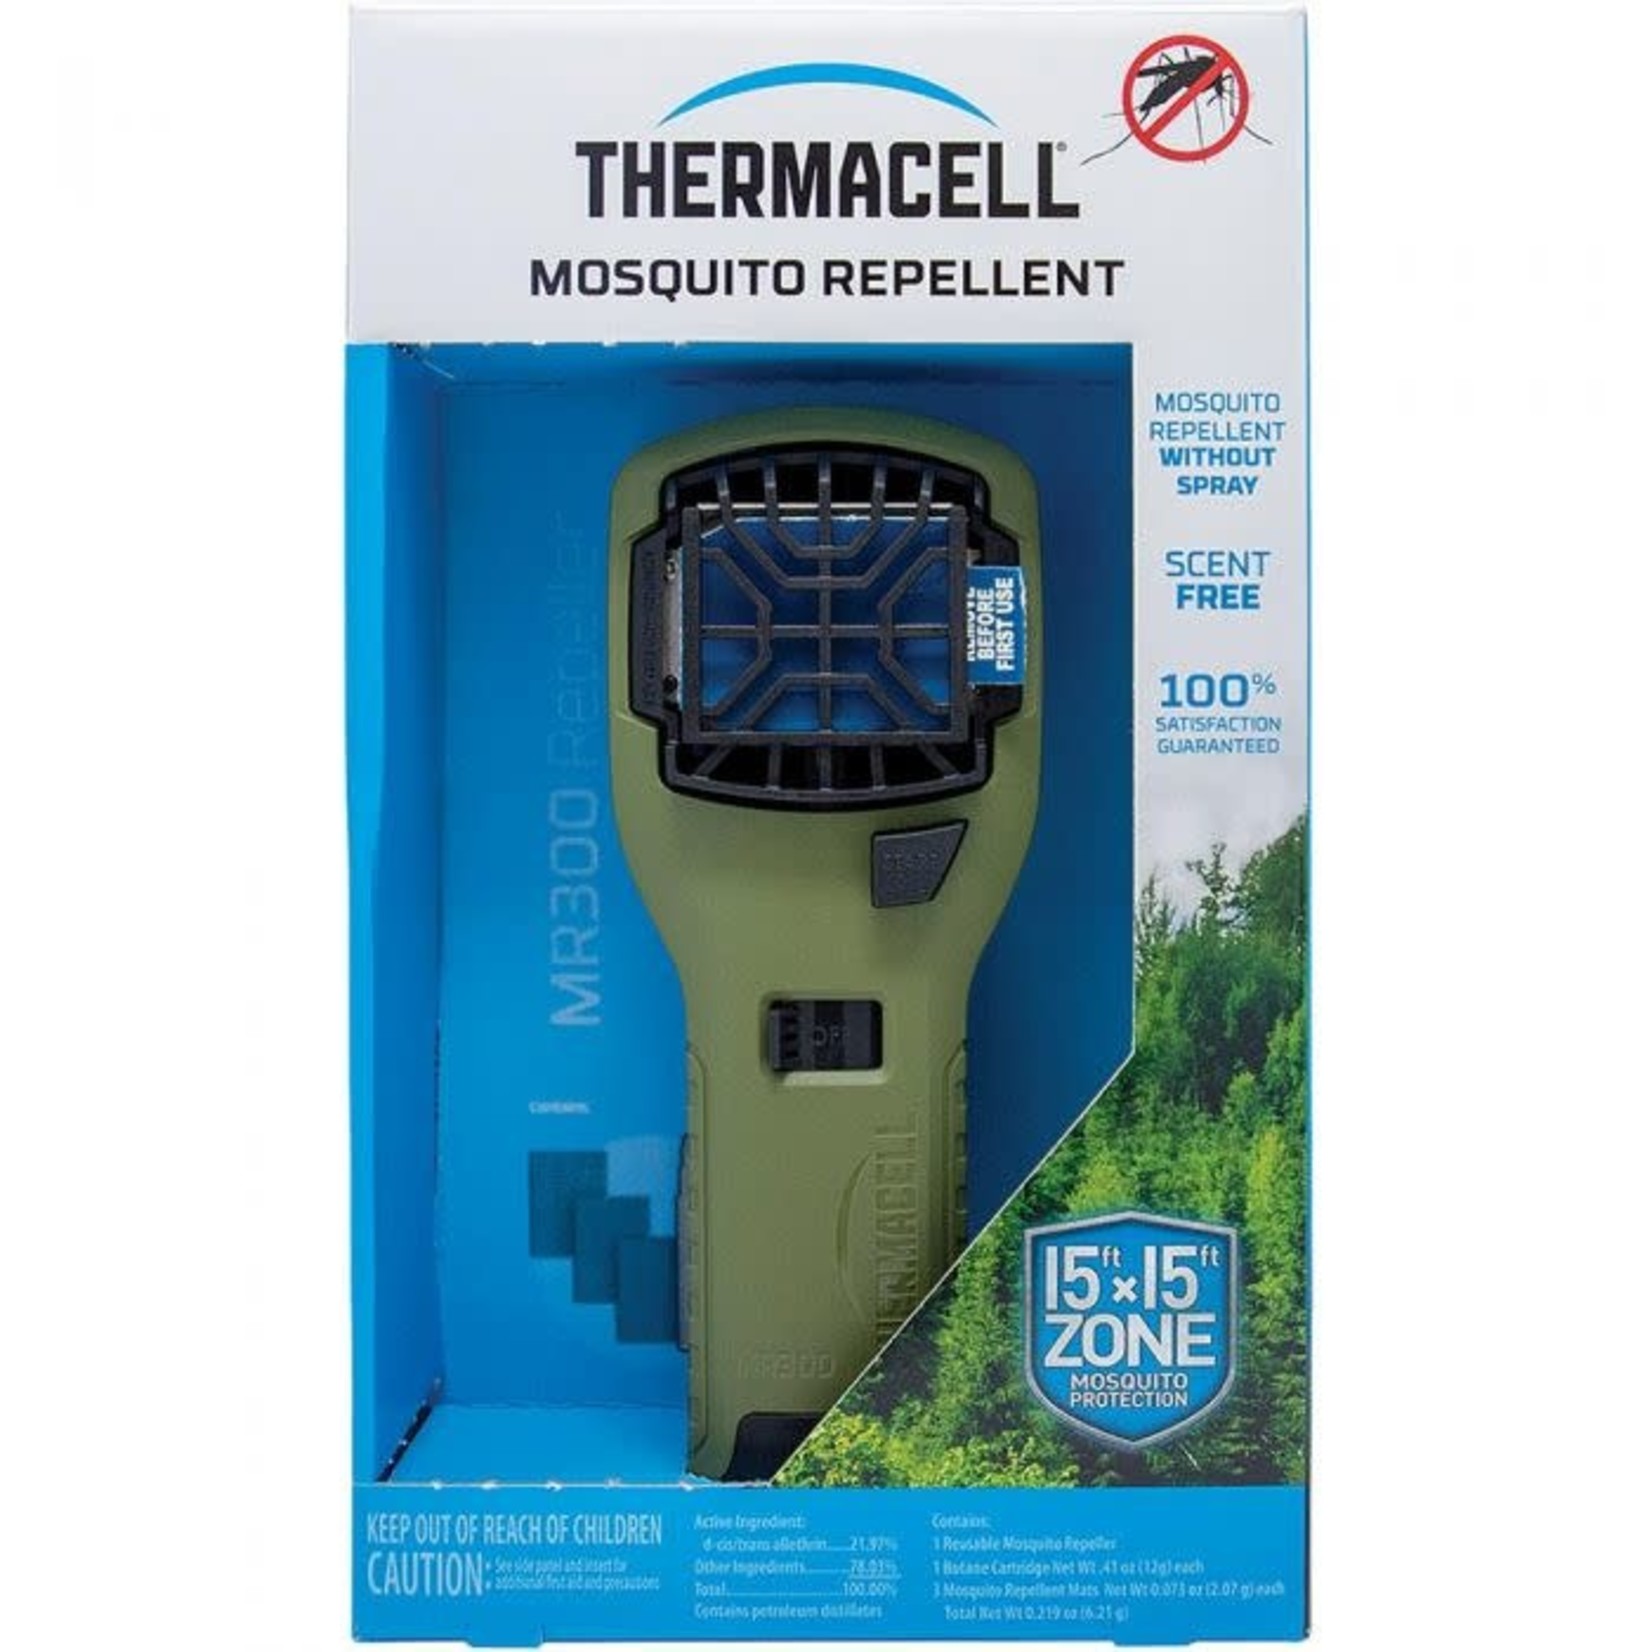 THERMACELL MOSQUITO REPELLER